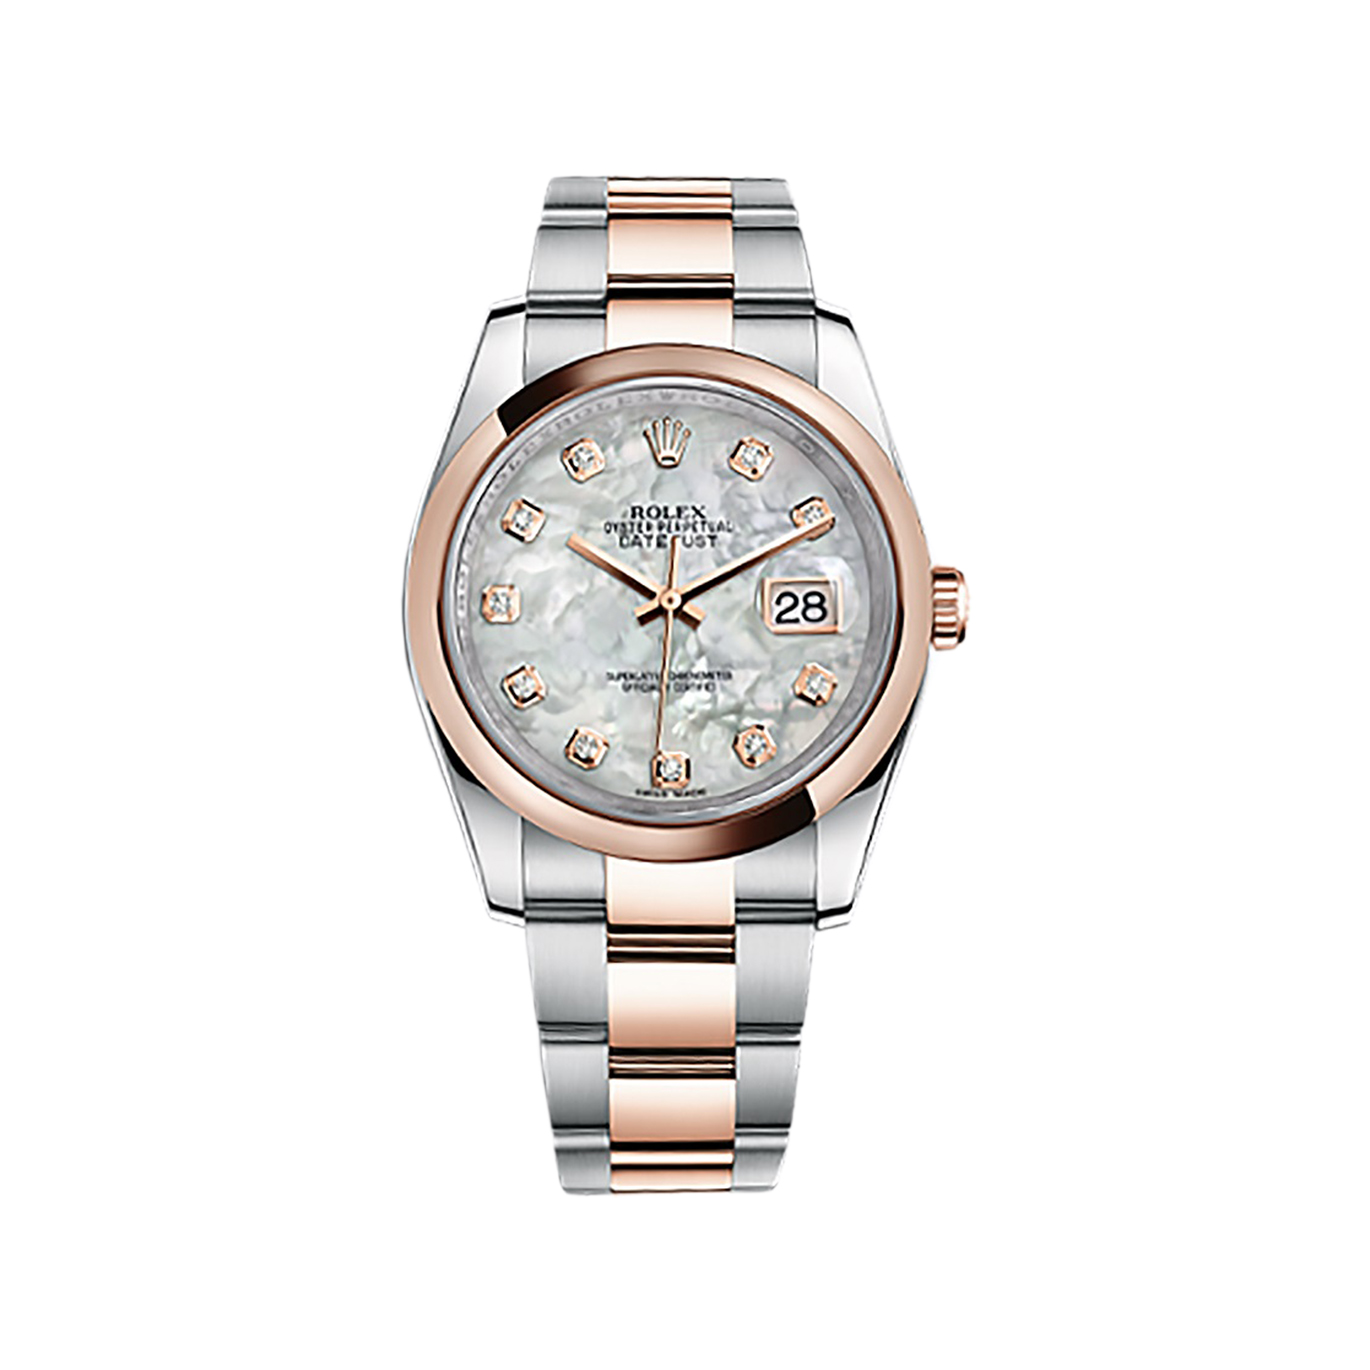 Datejust 36 116201 Rose Gold & Stainless Steel Watch (White Mother-of-Pearl Set with Diamonds)